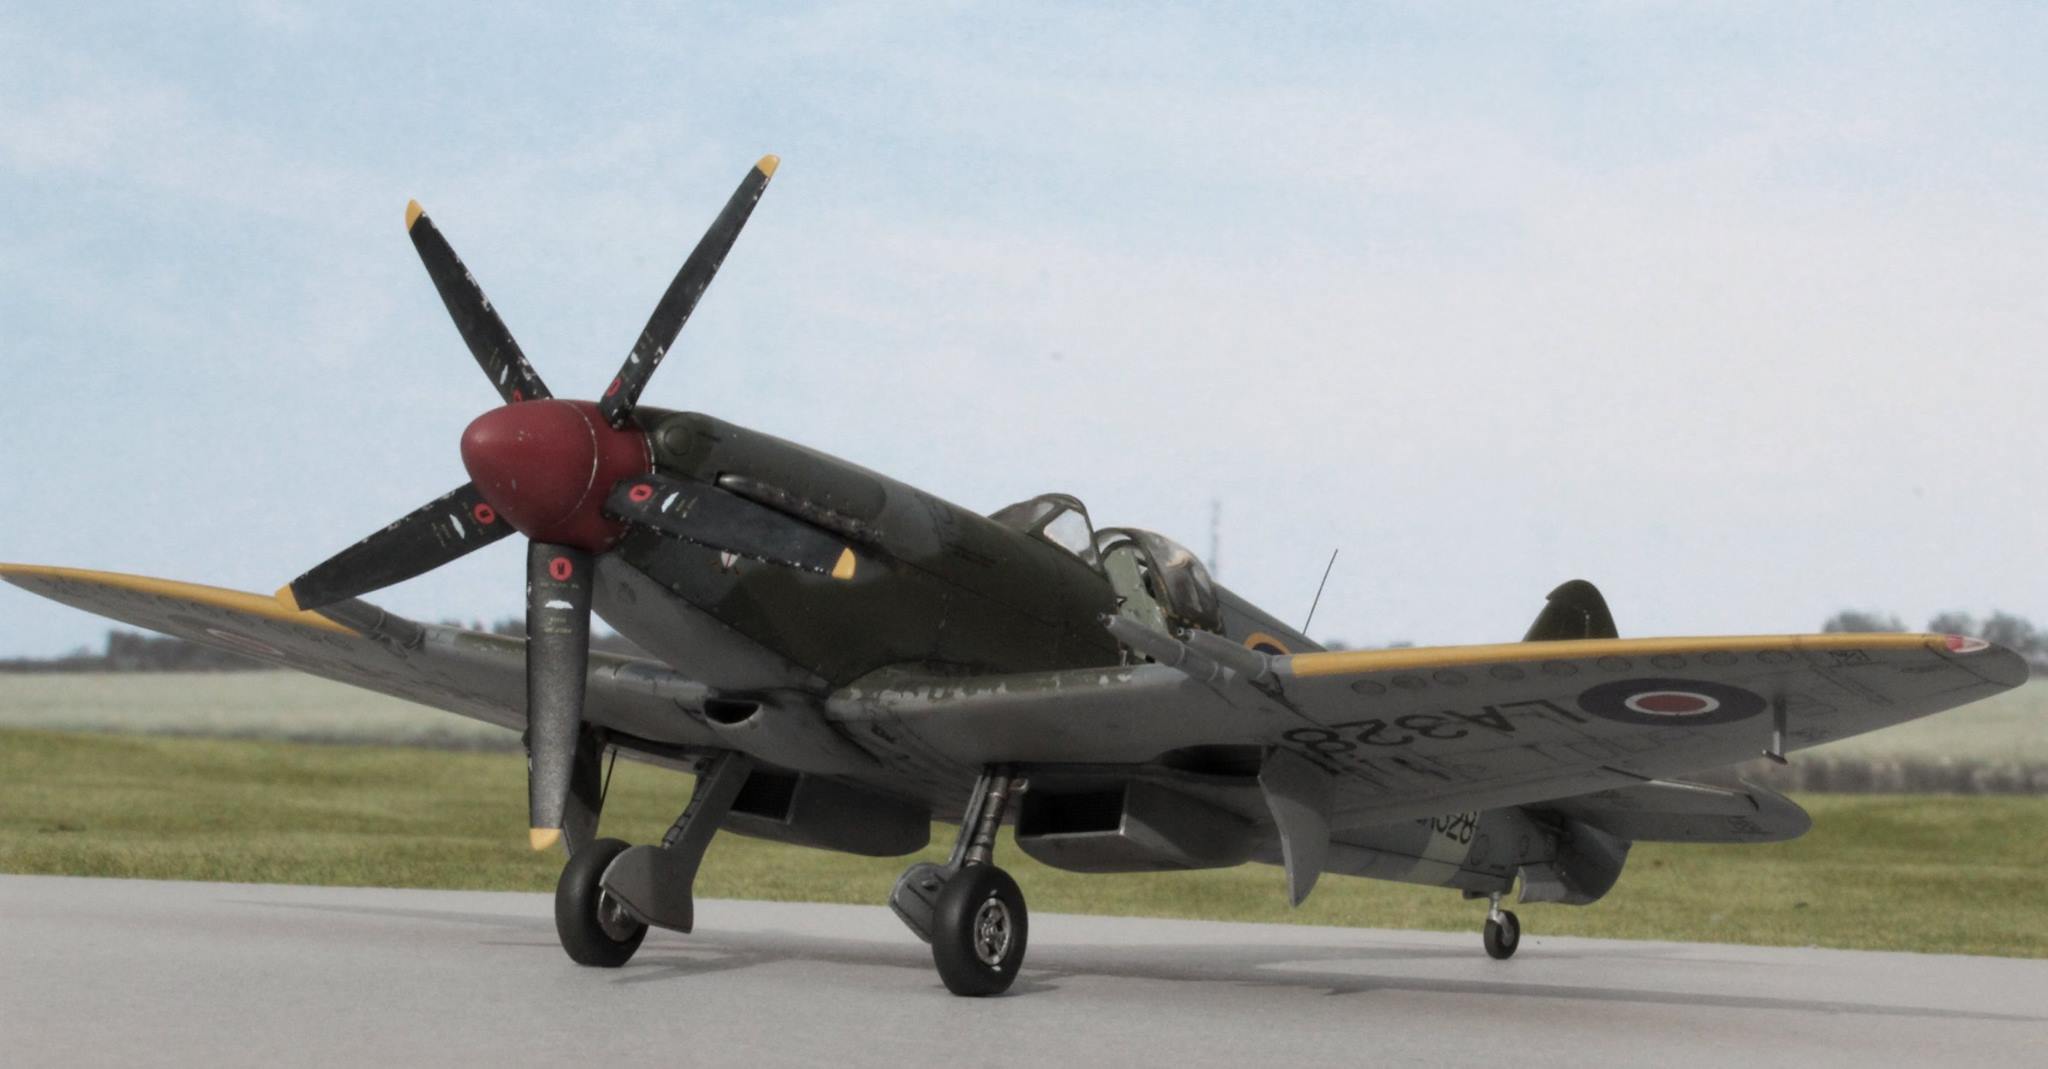 Spitfire F Mk 21 of 600 Squadron (County of London) RAuxAF, Biggin Hill, 1947. Airfix kit-bash in 1/48th scale.